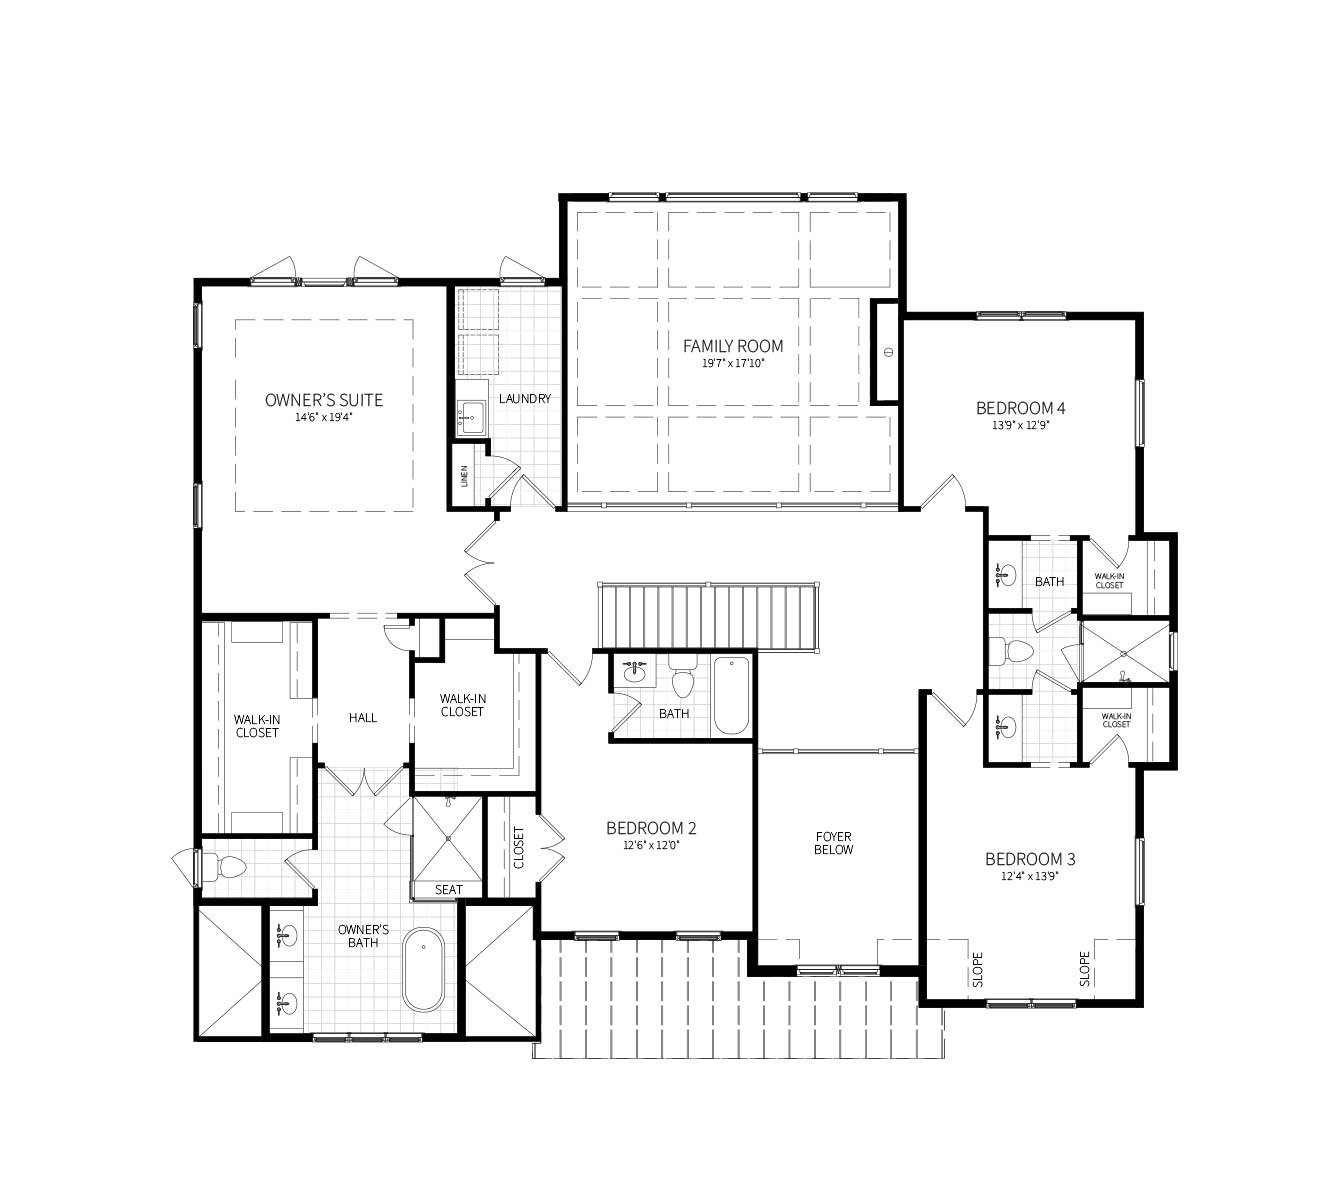 The second floor plan for 10301 South Glen Rd, expansive owners suite, 3 additional bedrooms, 2 baths